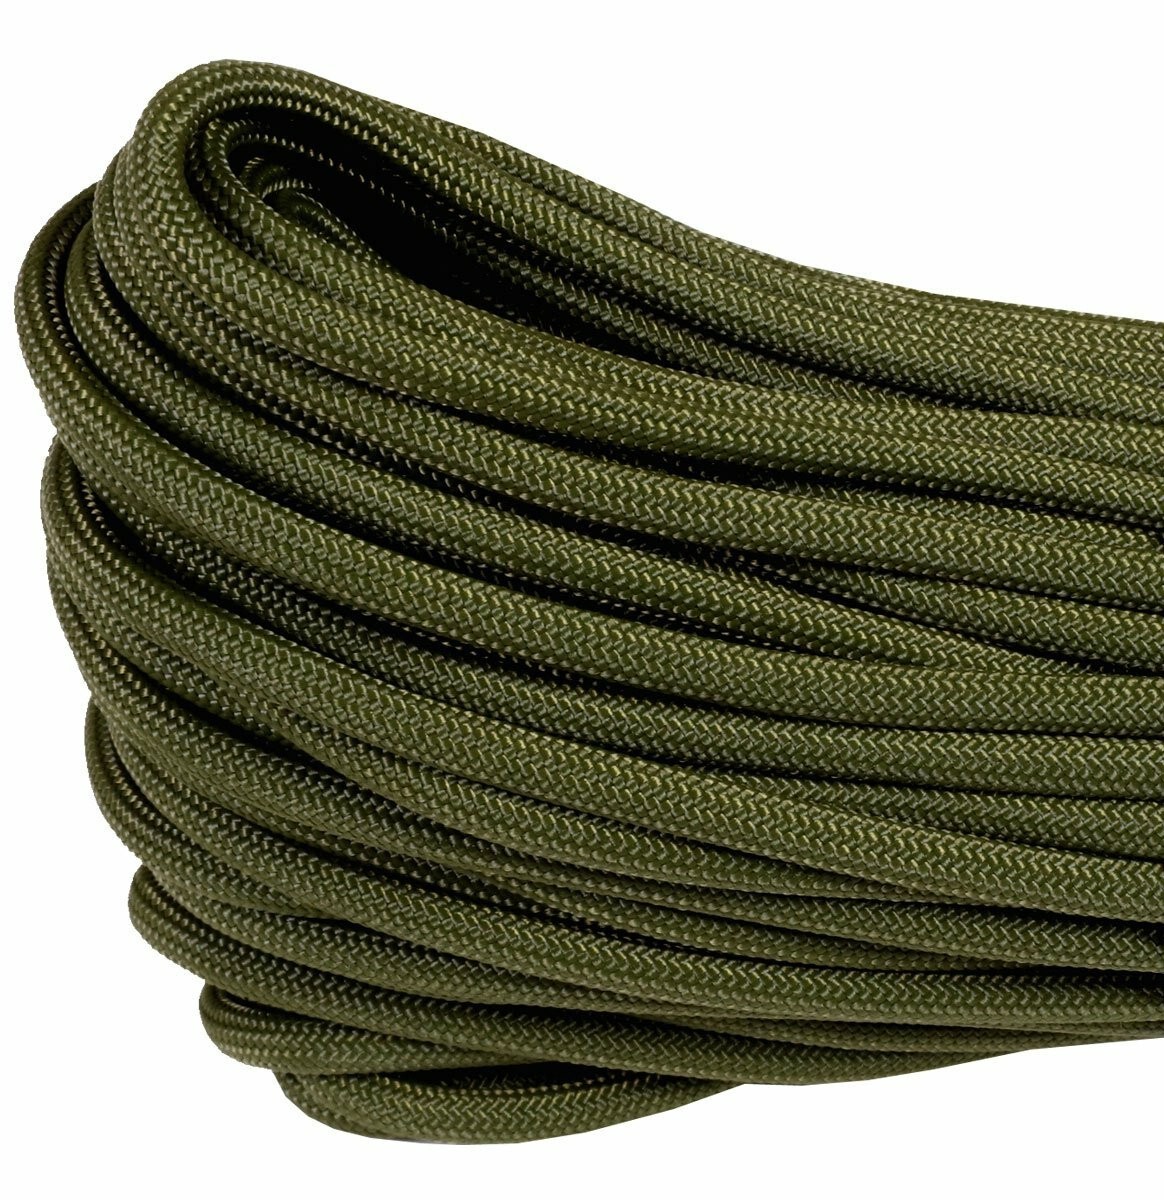 Mil-Spec Camo OD Green Paracord 550 100ft 7 strand MIL-C-5040H MADE IN USA  US Department of Defense